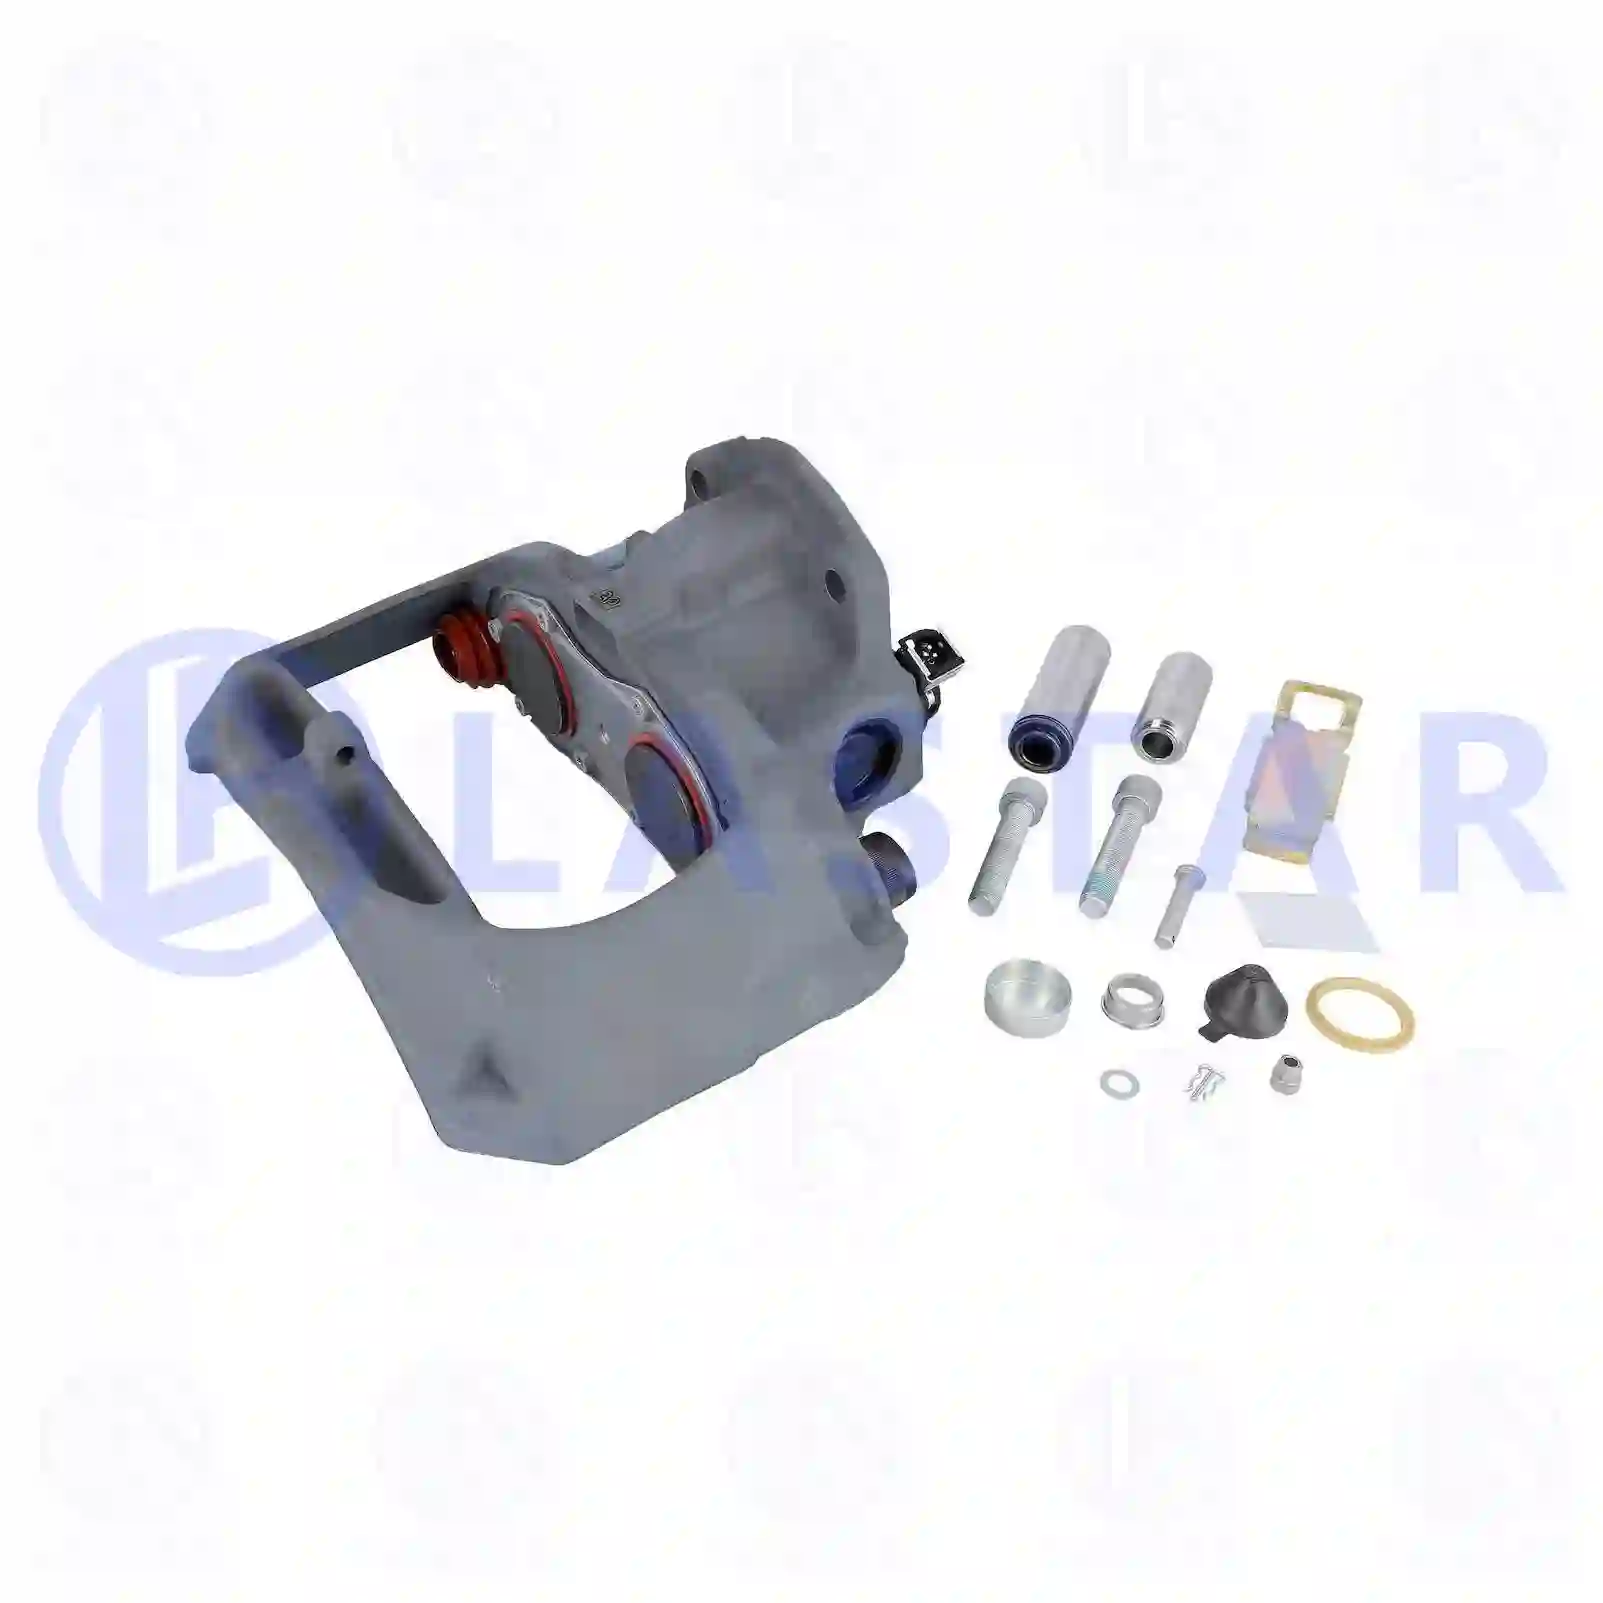 Brake caliper, reman. / without old core, 77714665, 1658010, 1857920, 41658010 ||  77714665 Lastar Spare Part | Truck Spare Parts, Auotomotive Spare Parts Brake caliper, reman. / without old core, 77714665, 1658010, 1857920, 41658010 ||  77714665 Lastar Spare Part | Truck Spare Parts, Auotomotive Spare Parts